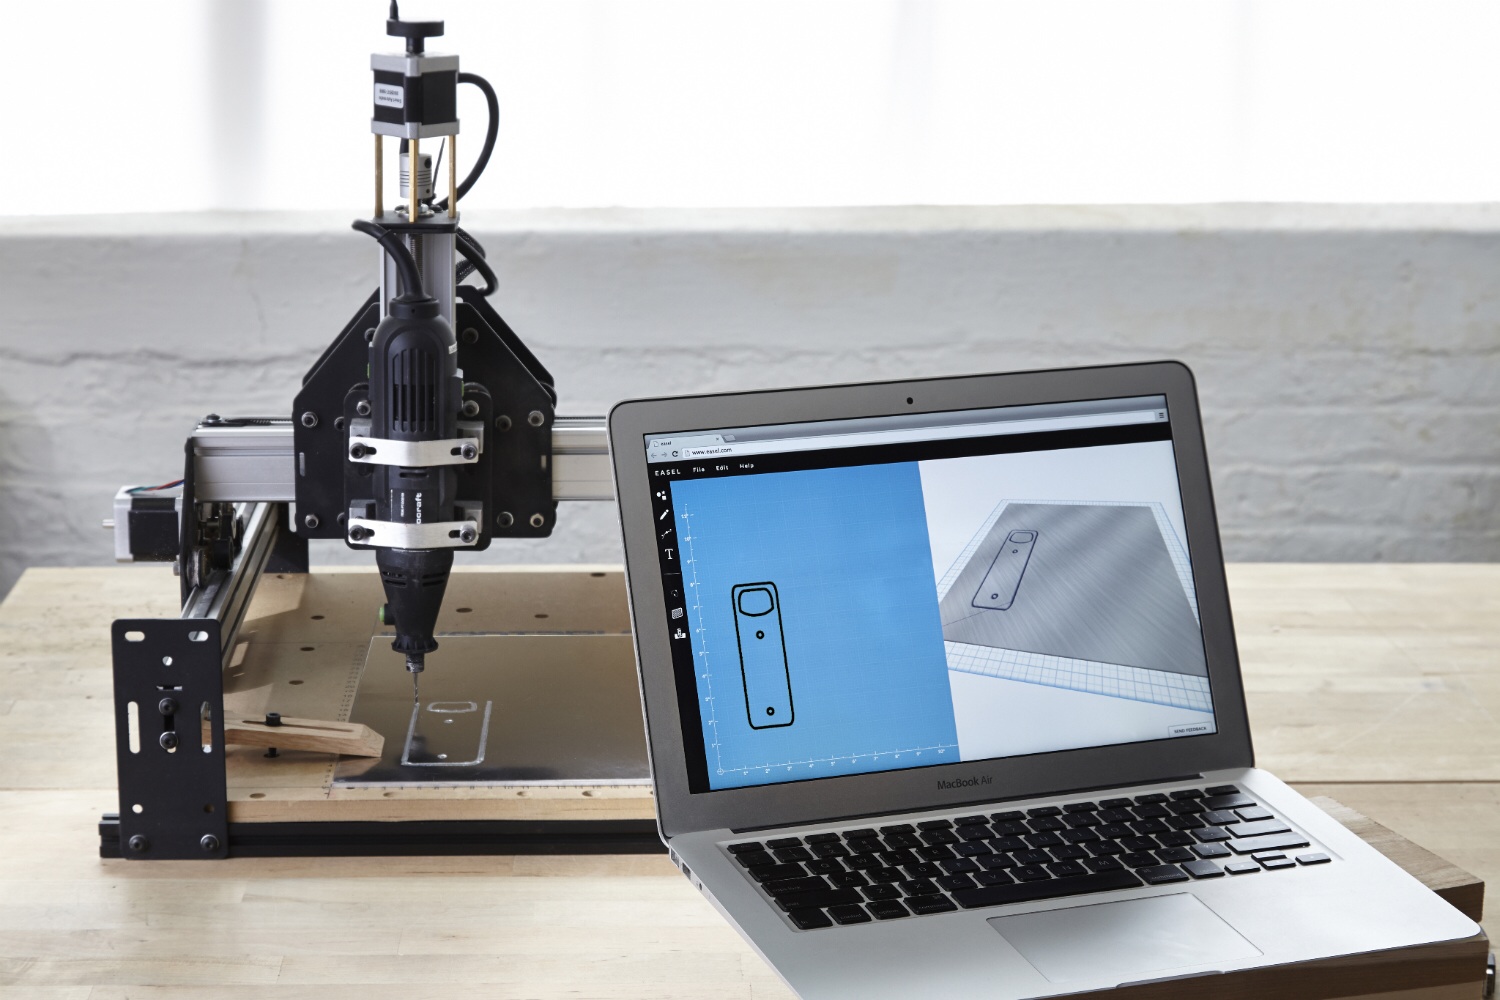 "Easel: A Free, Powerful CNC Software"